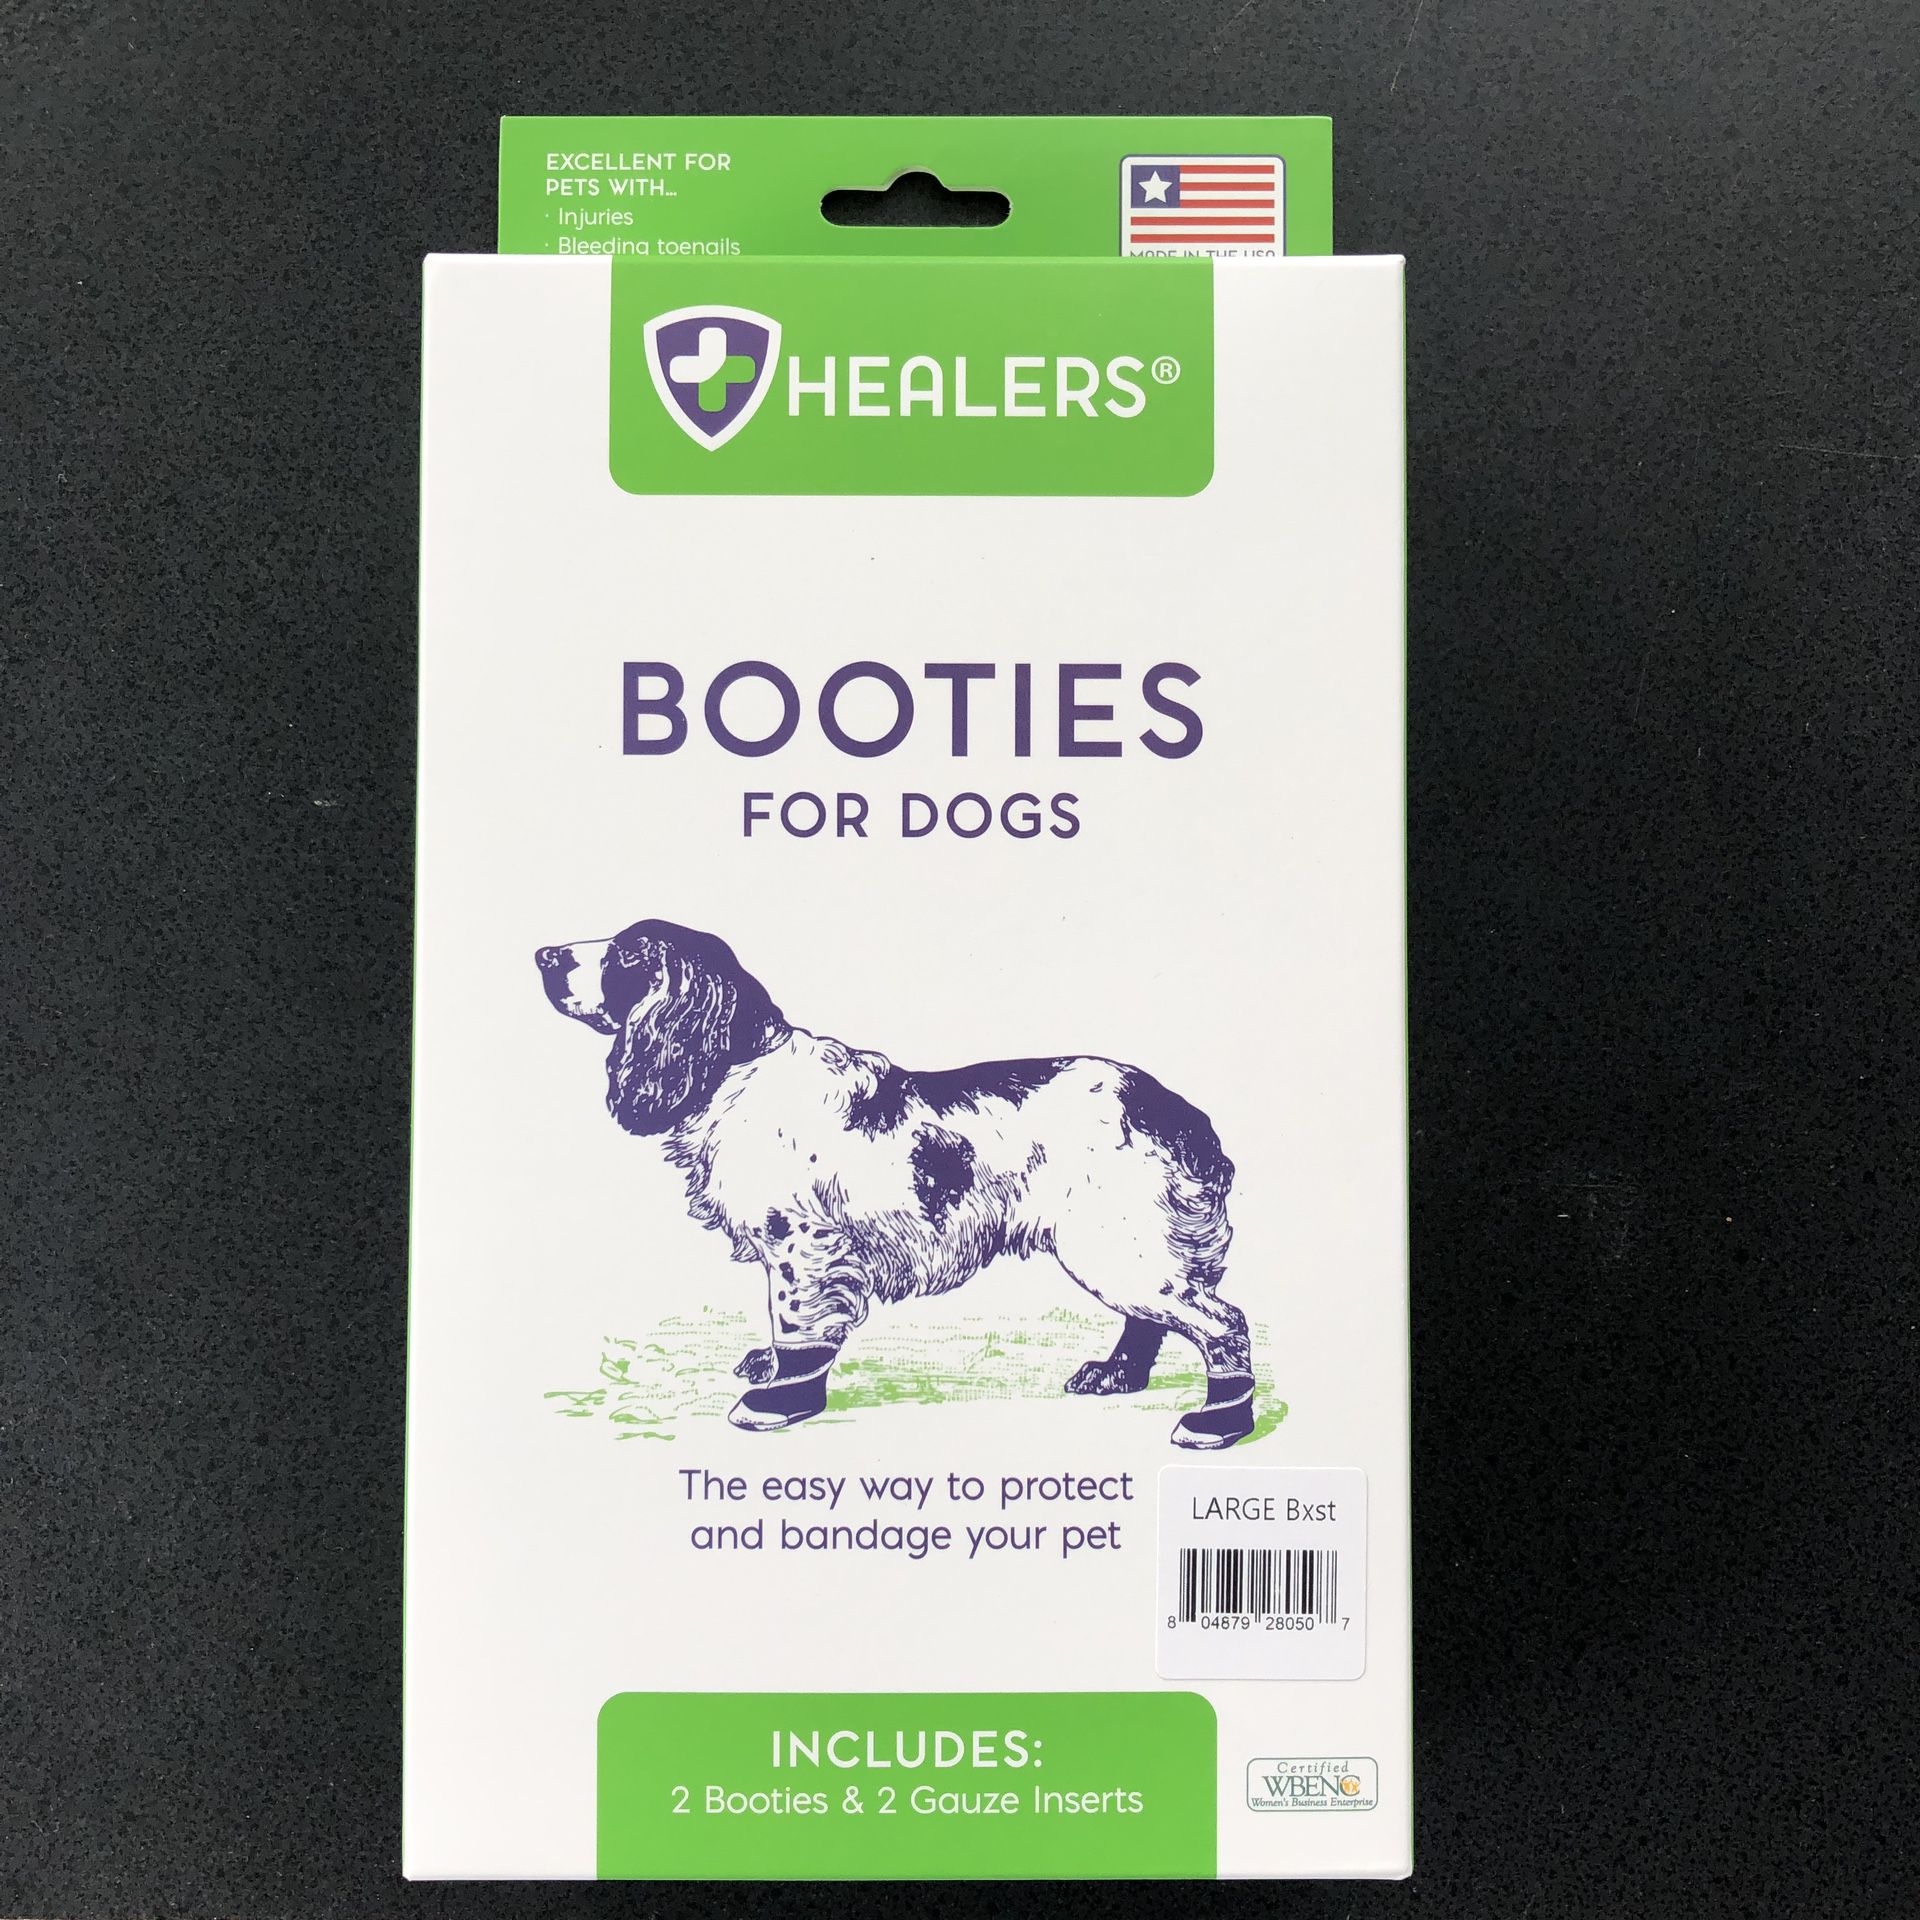 Healers Booties and Gauze Inserts for Dogs